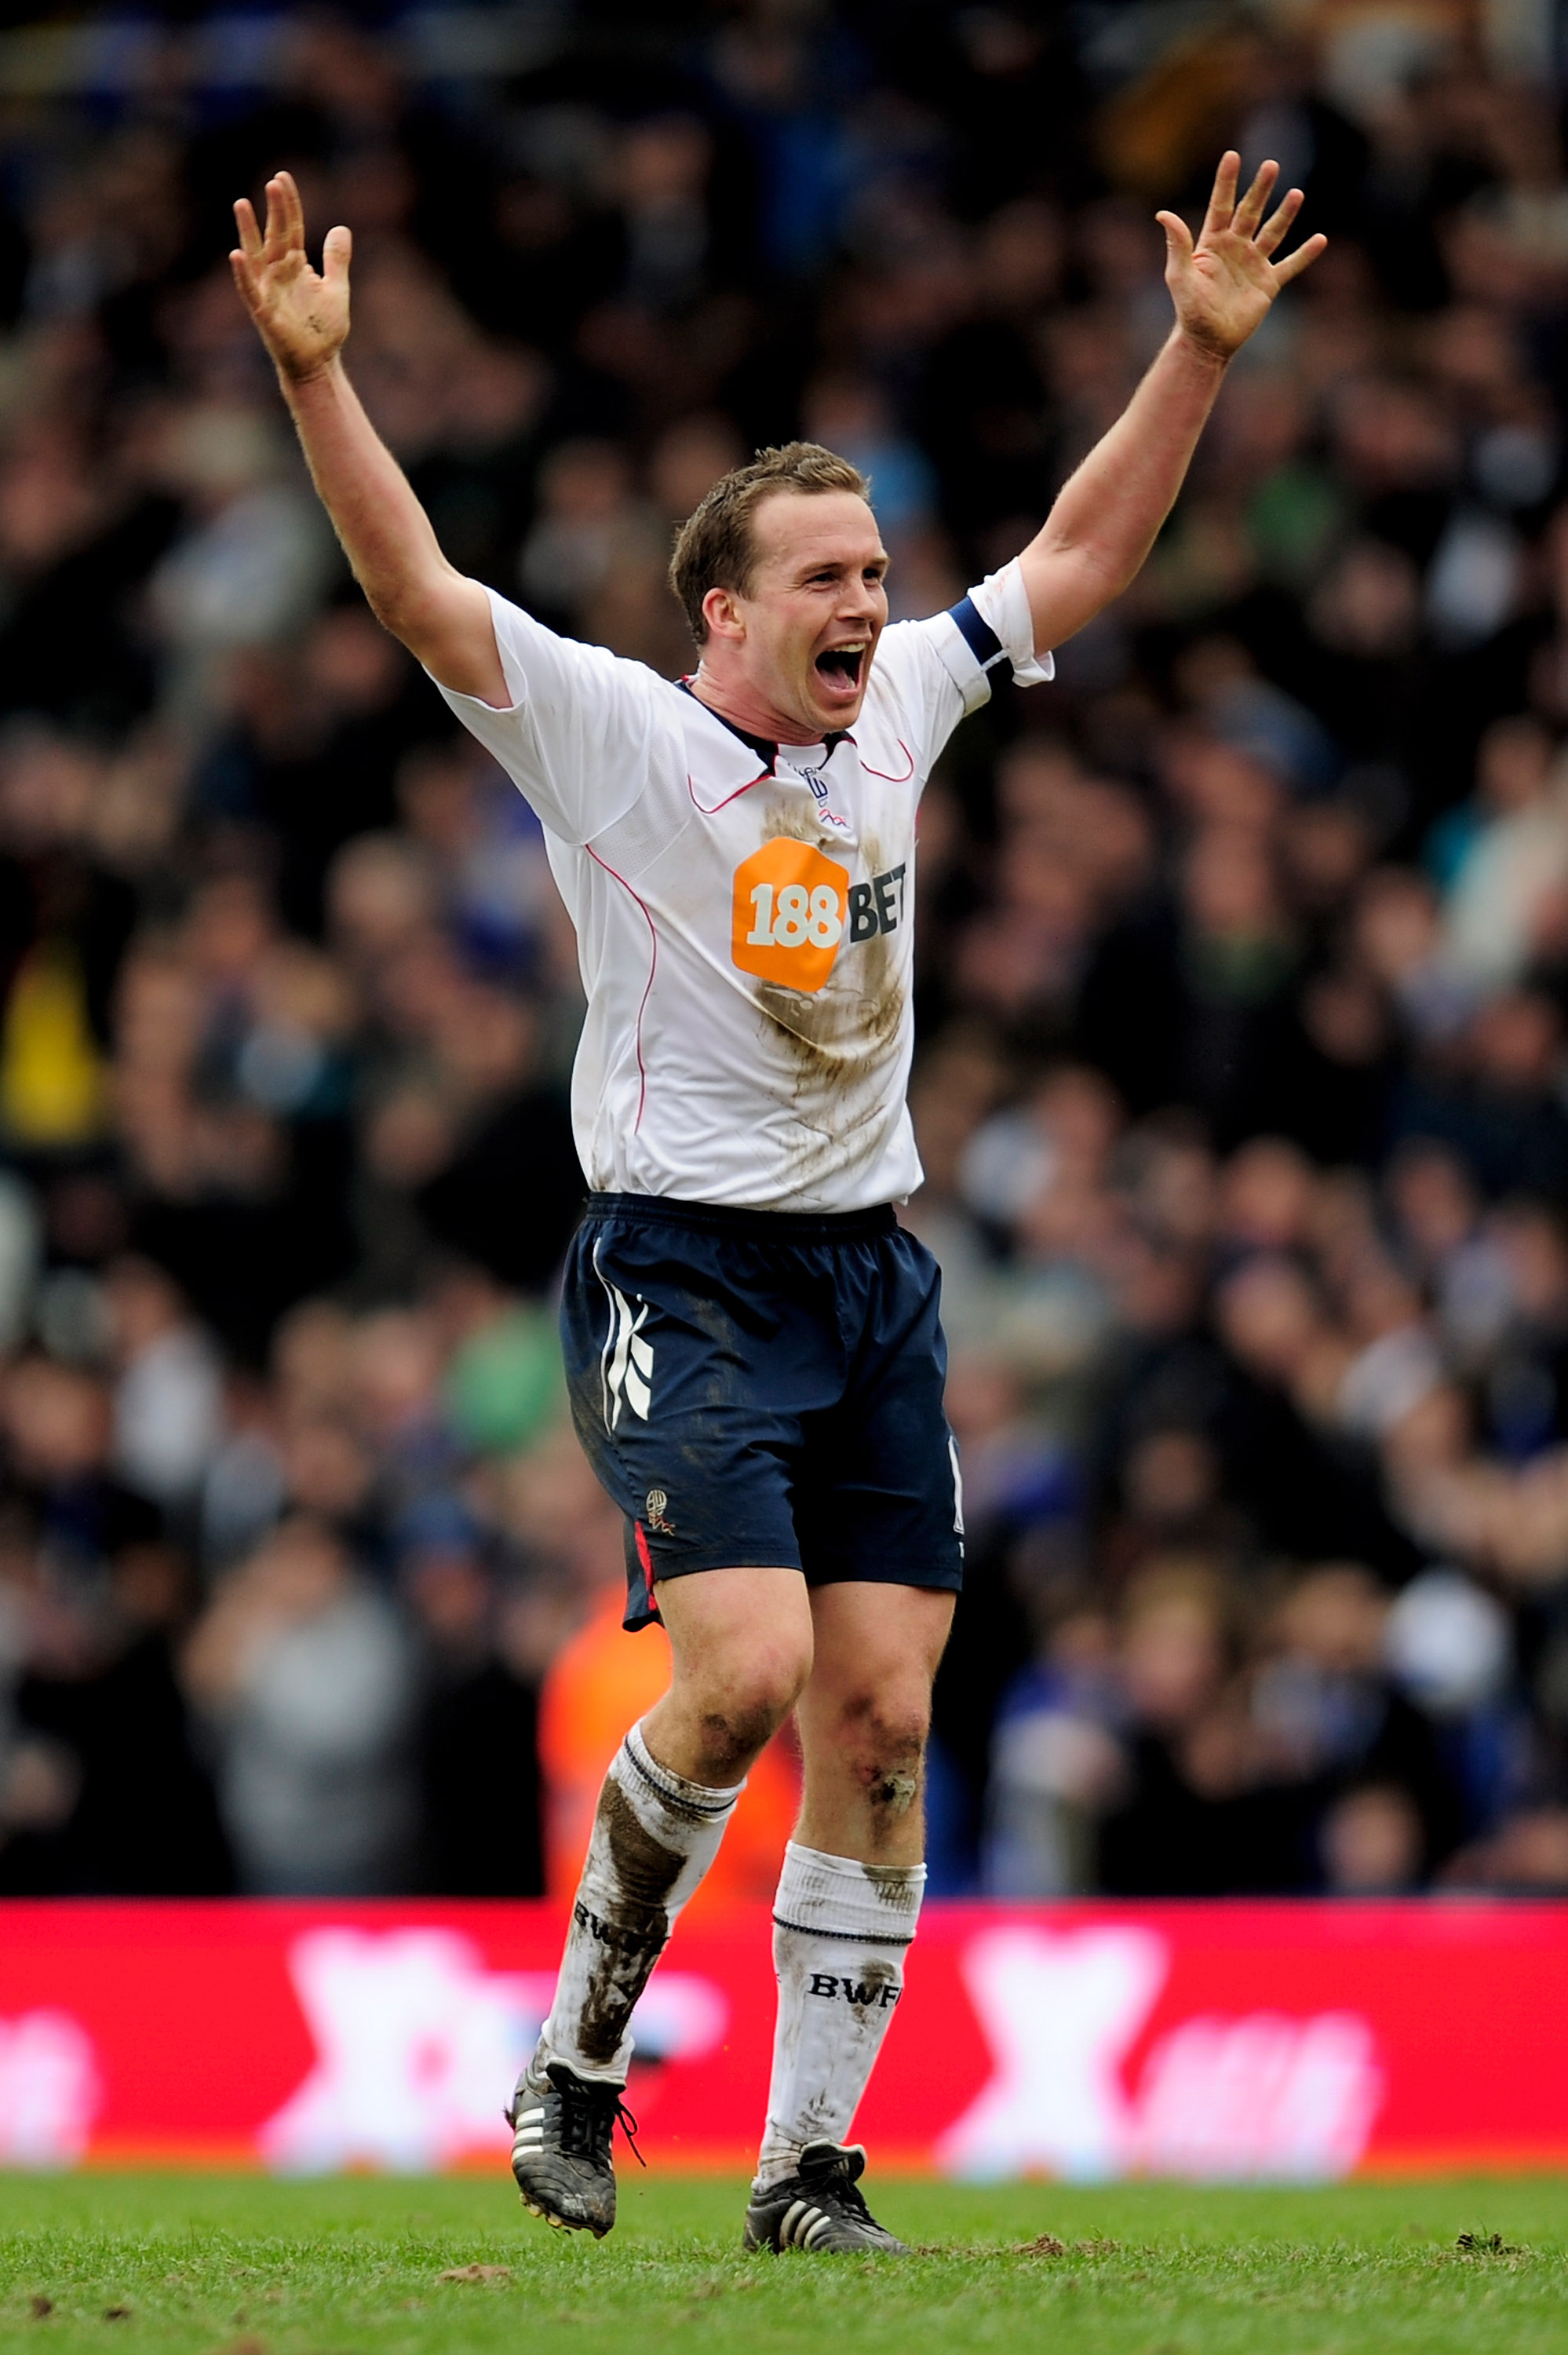 BIRMINGHAM, ENGLAND - MARCH 12:  Kevin Davies of Bolton Wanderers celebrates during the FA Cup sponsored by E.On Sixth Round match between Birmingham City and Bolton Wanderers at St Andrews on March 12, 2011 in Birmingham, England.  (Photo by Jamie McDona